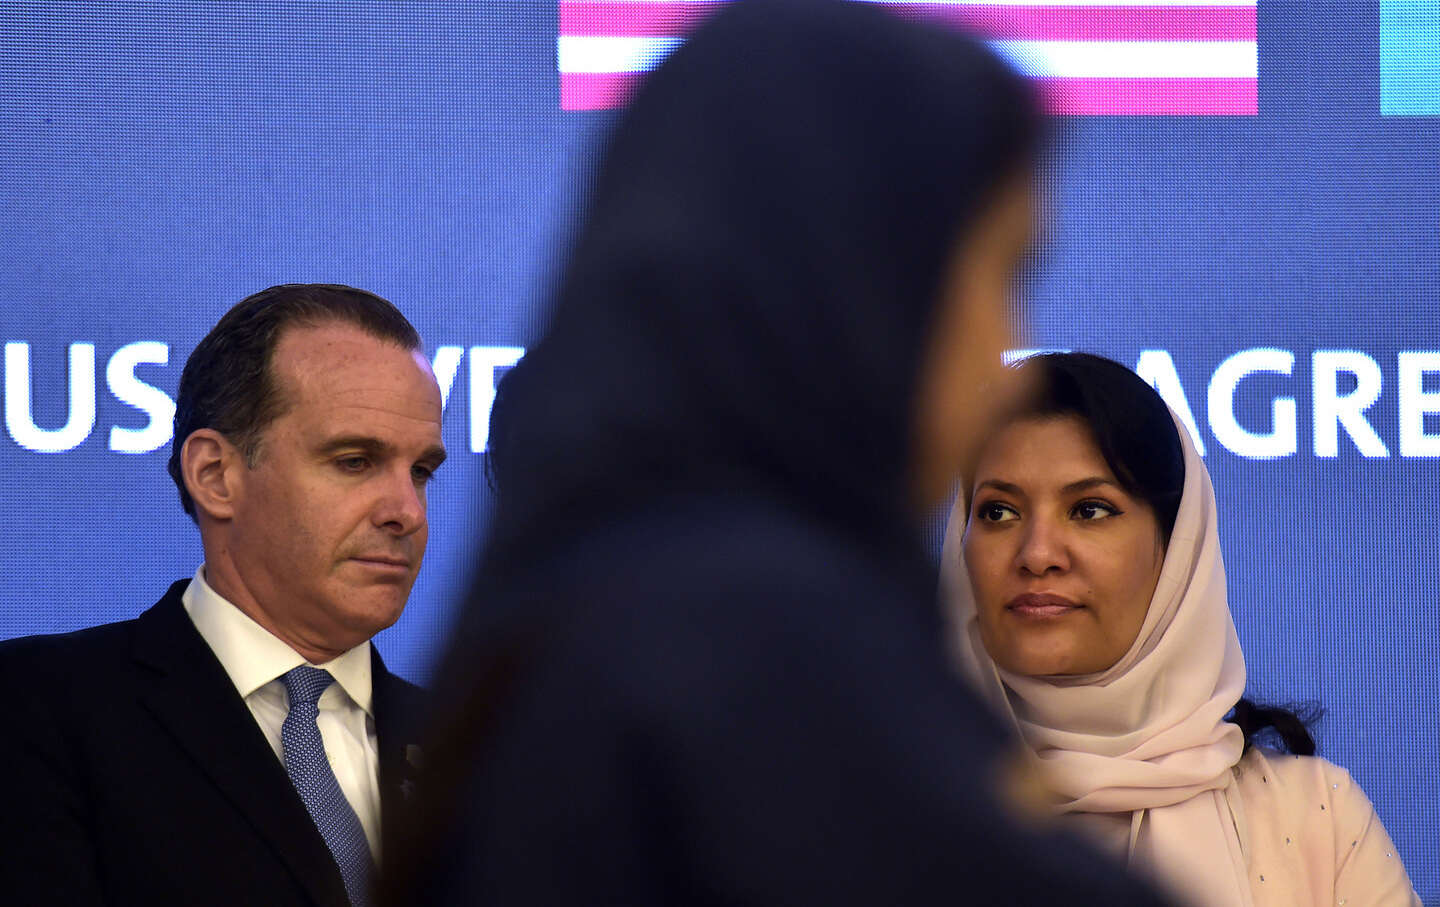 Brett McGurk, US National Security Council coordinator for the Middle East and North Africa, and Princess Reema bint Bandar bin Sultan bin Abdulaziz al-Saud, Saudi ambassador to the US, look on during an investment agreement signing ceremony between the US and Saudi Arabia in the Red Sea coastal city of Jeddah on July 16, 2022.